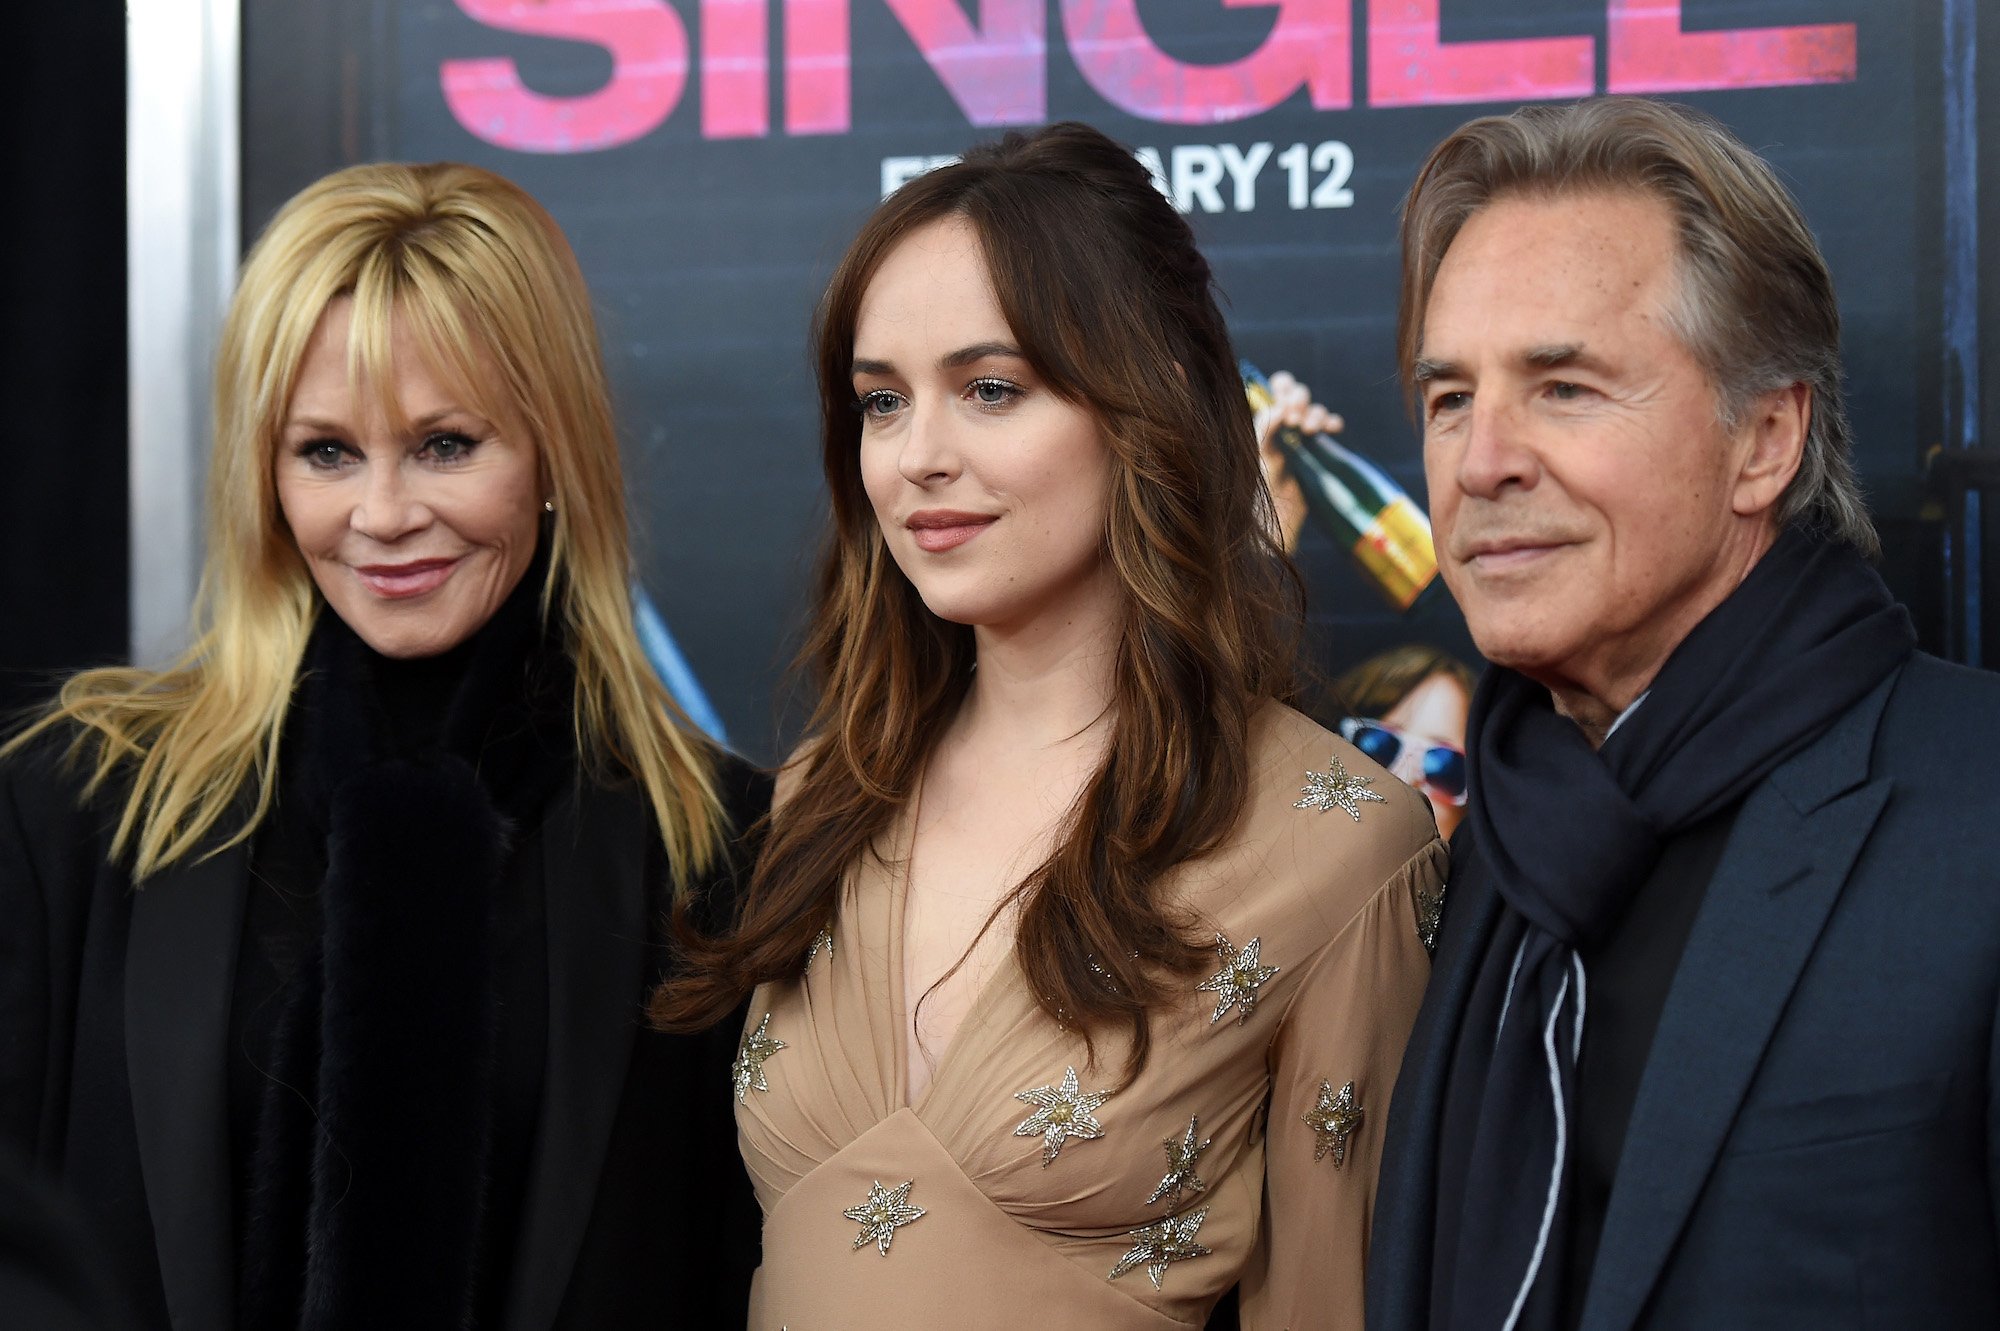 Melanie Griffith, Dakota Johnson, and Don Johnson at the New York premiere of 'How To Be Single' at the NYU Skirball Center on February 3, 2016.